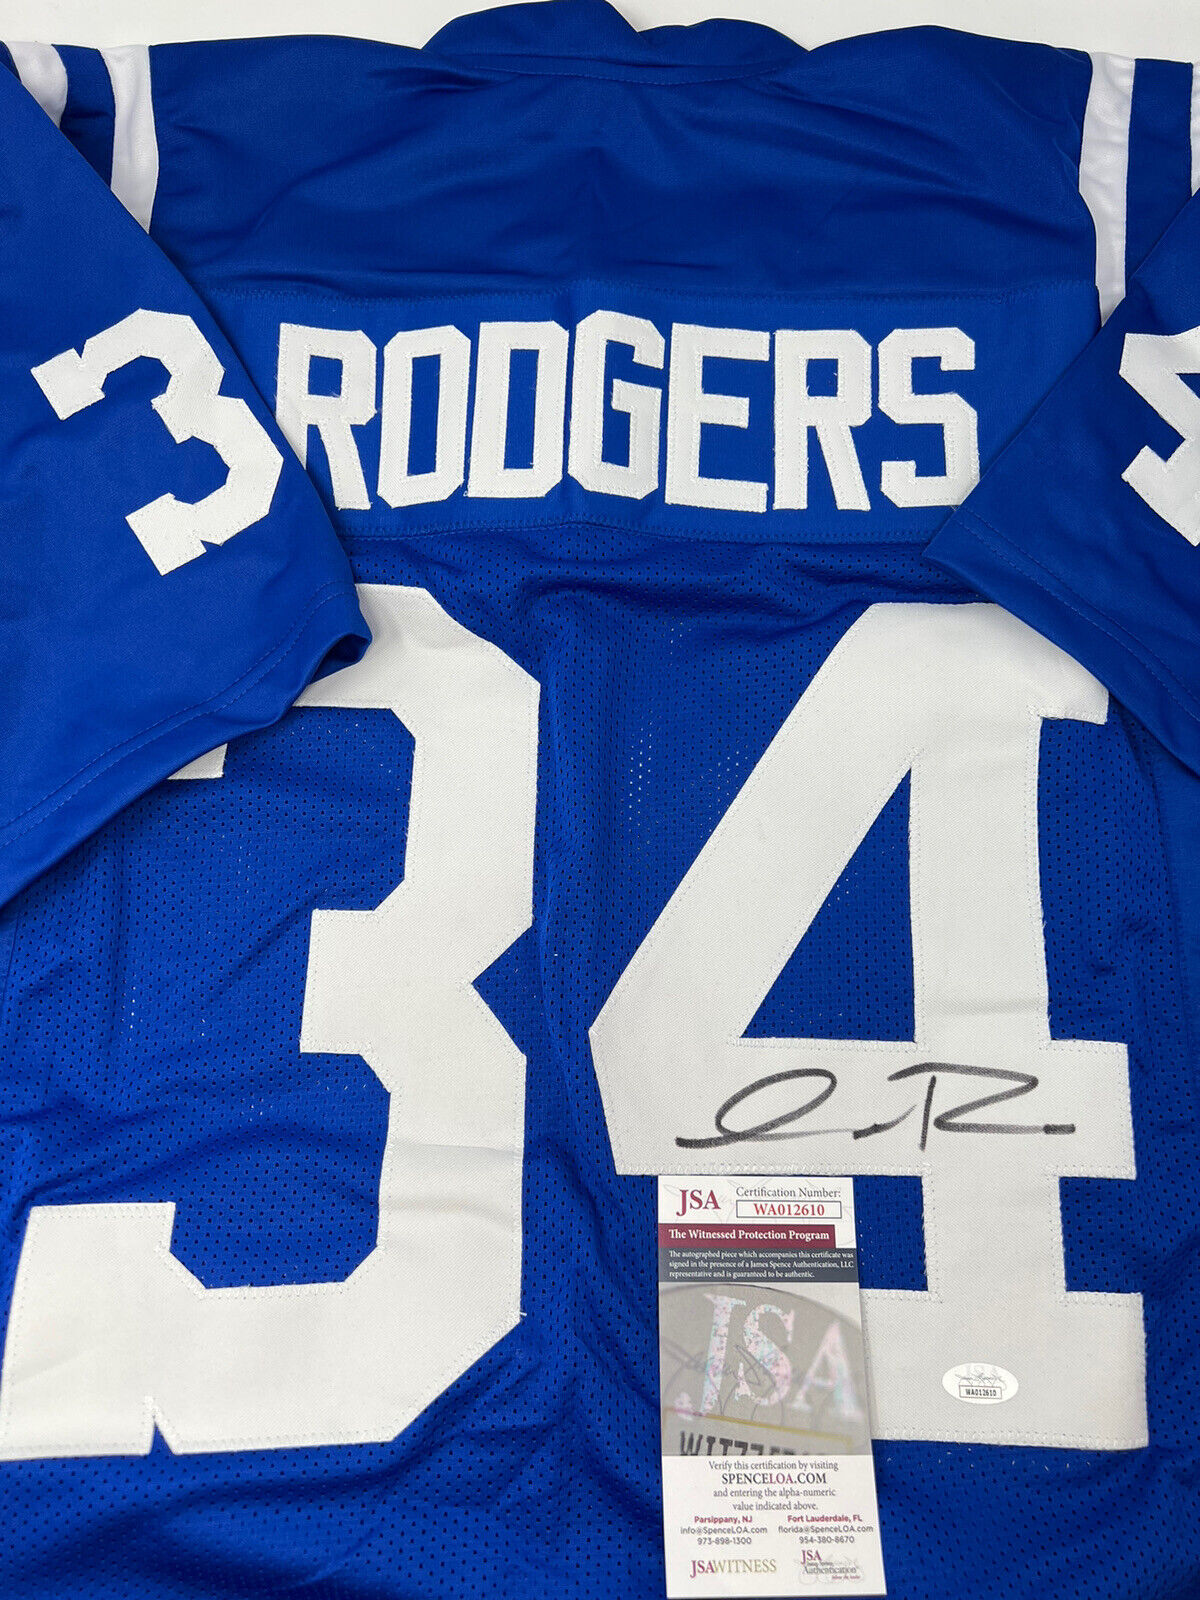 Isaiah Rodgers Hand Signed Autographed Indianapolis Colts Jersey with JSA COA